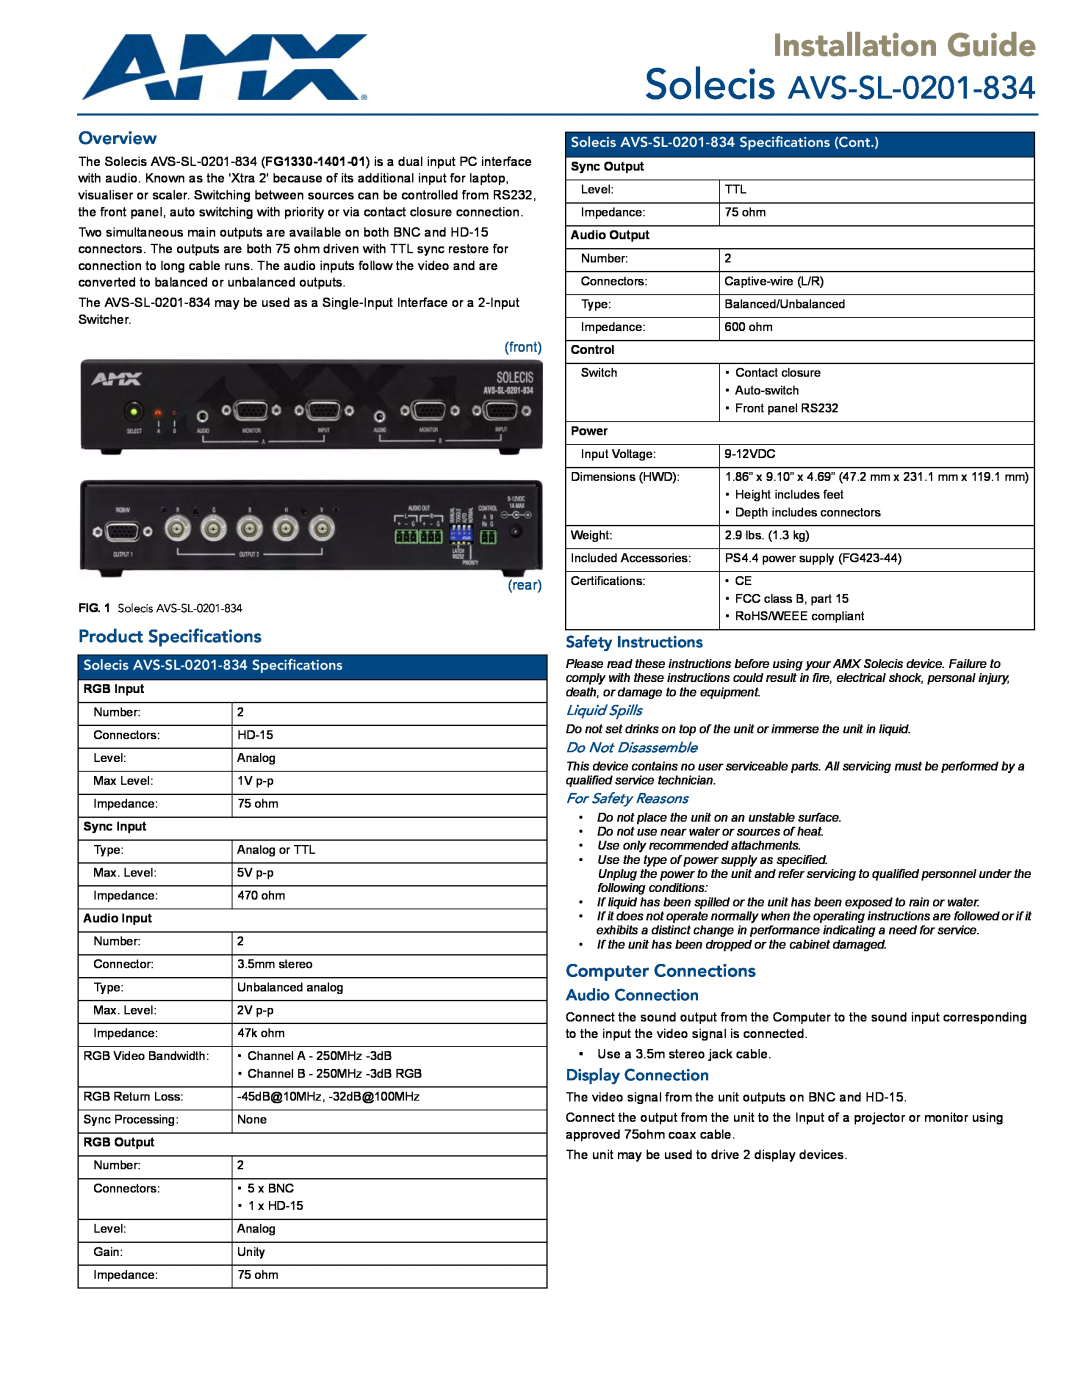 AMX AVS-SL-0201-834 specifications Safety Instructions, Audio Connection, Display Connection, front rear, Overview 